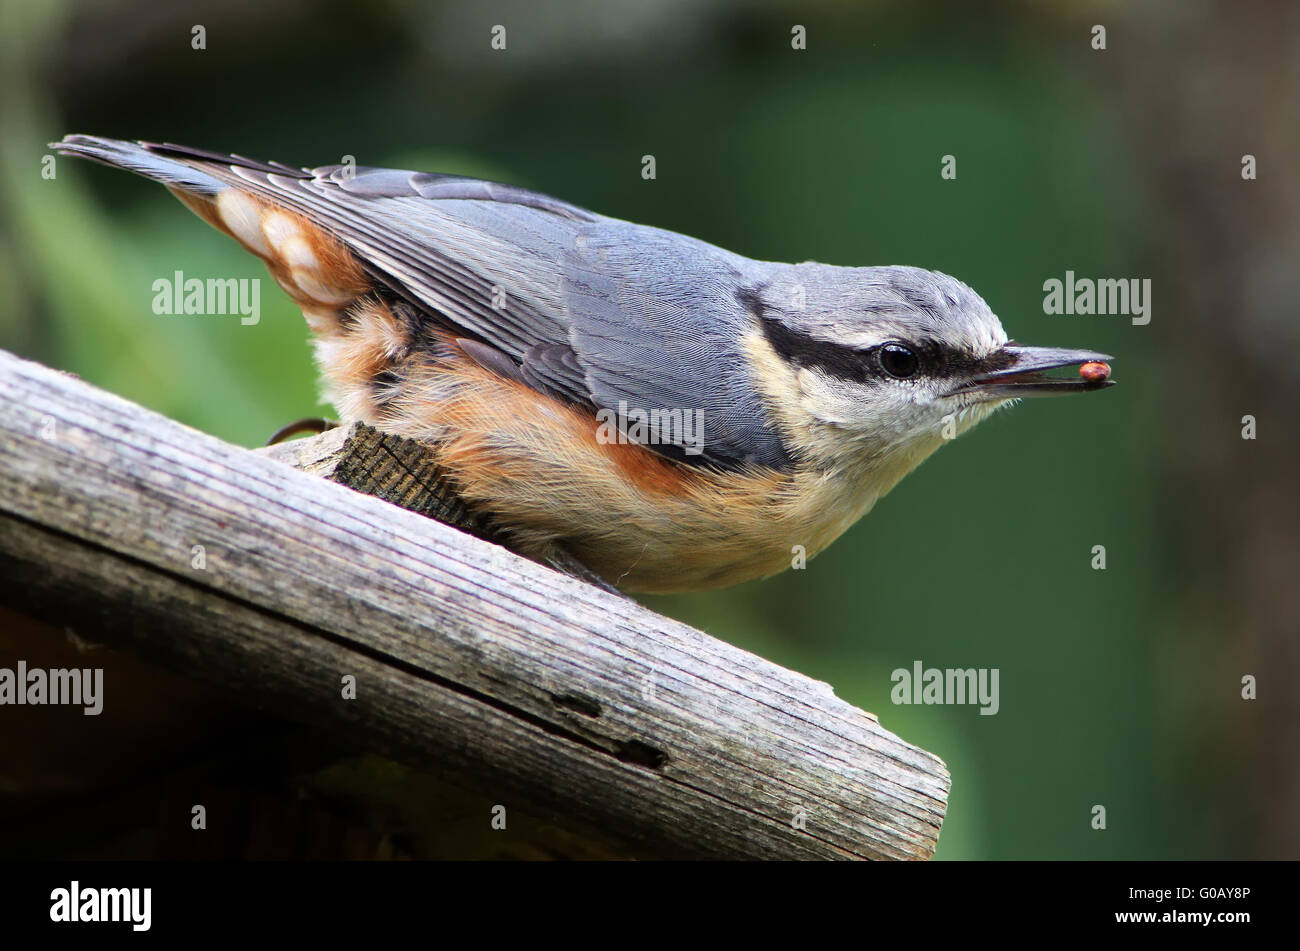 Nuthatch on the bird house Stock Photo